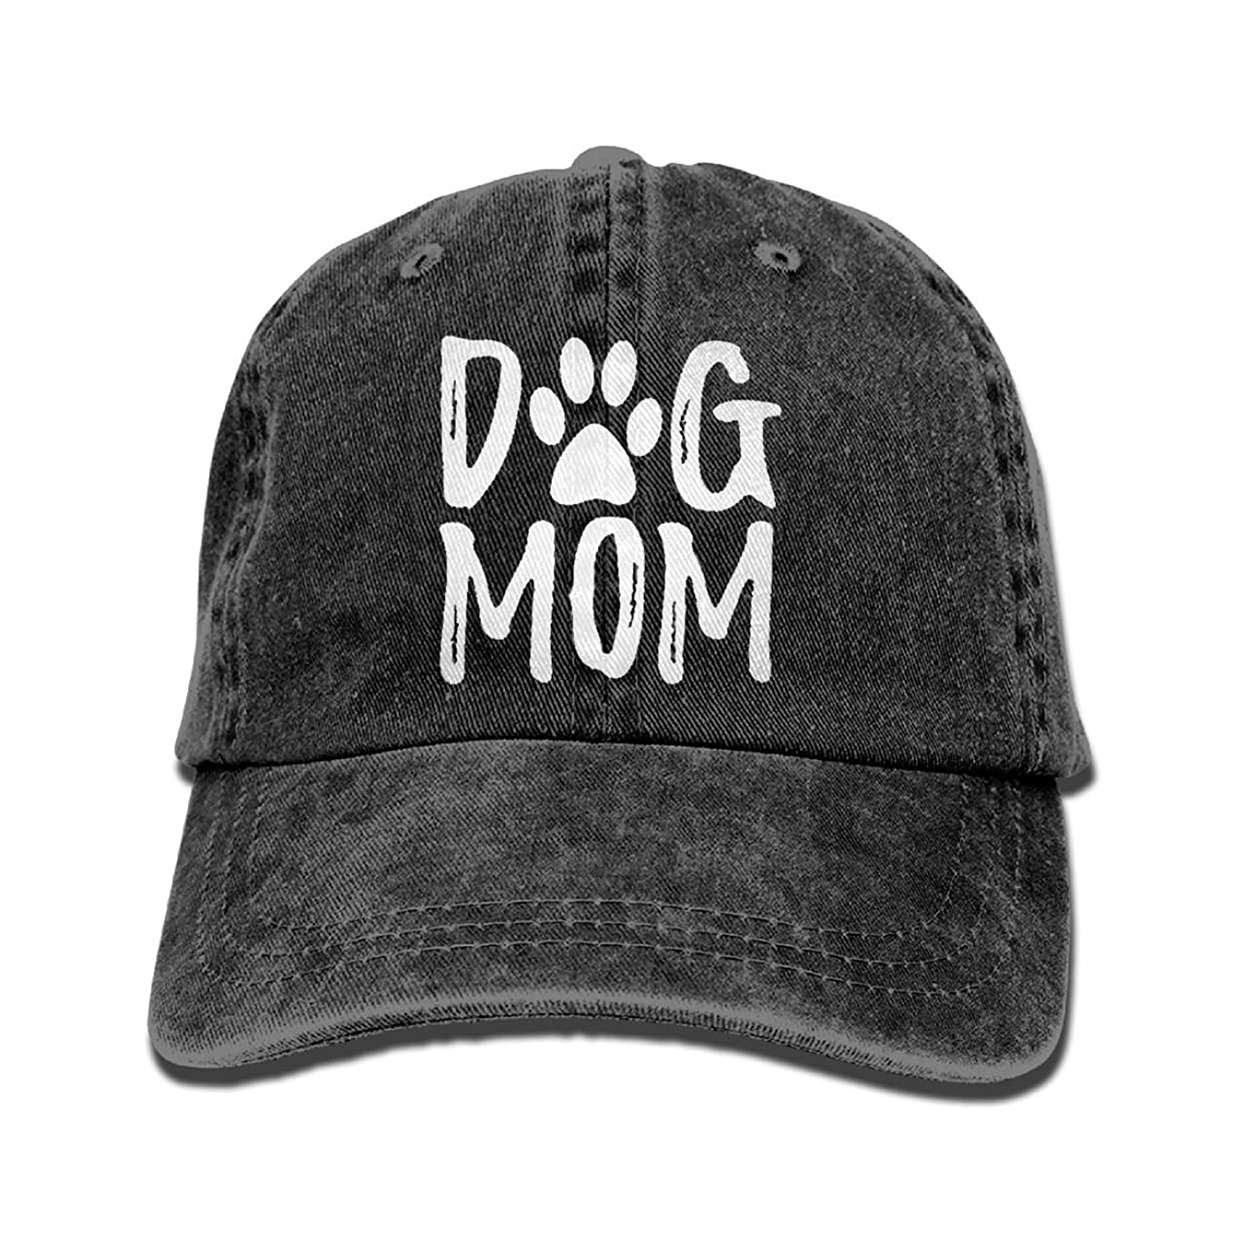 Rough Collie Beanie Embroidered Beanies Dog Mum Dog Dad Dog Lovers Knit Beanie Winter Hat Agility Dogs Dog Mom Christmas Show Dogs